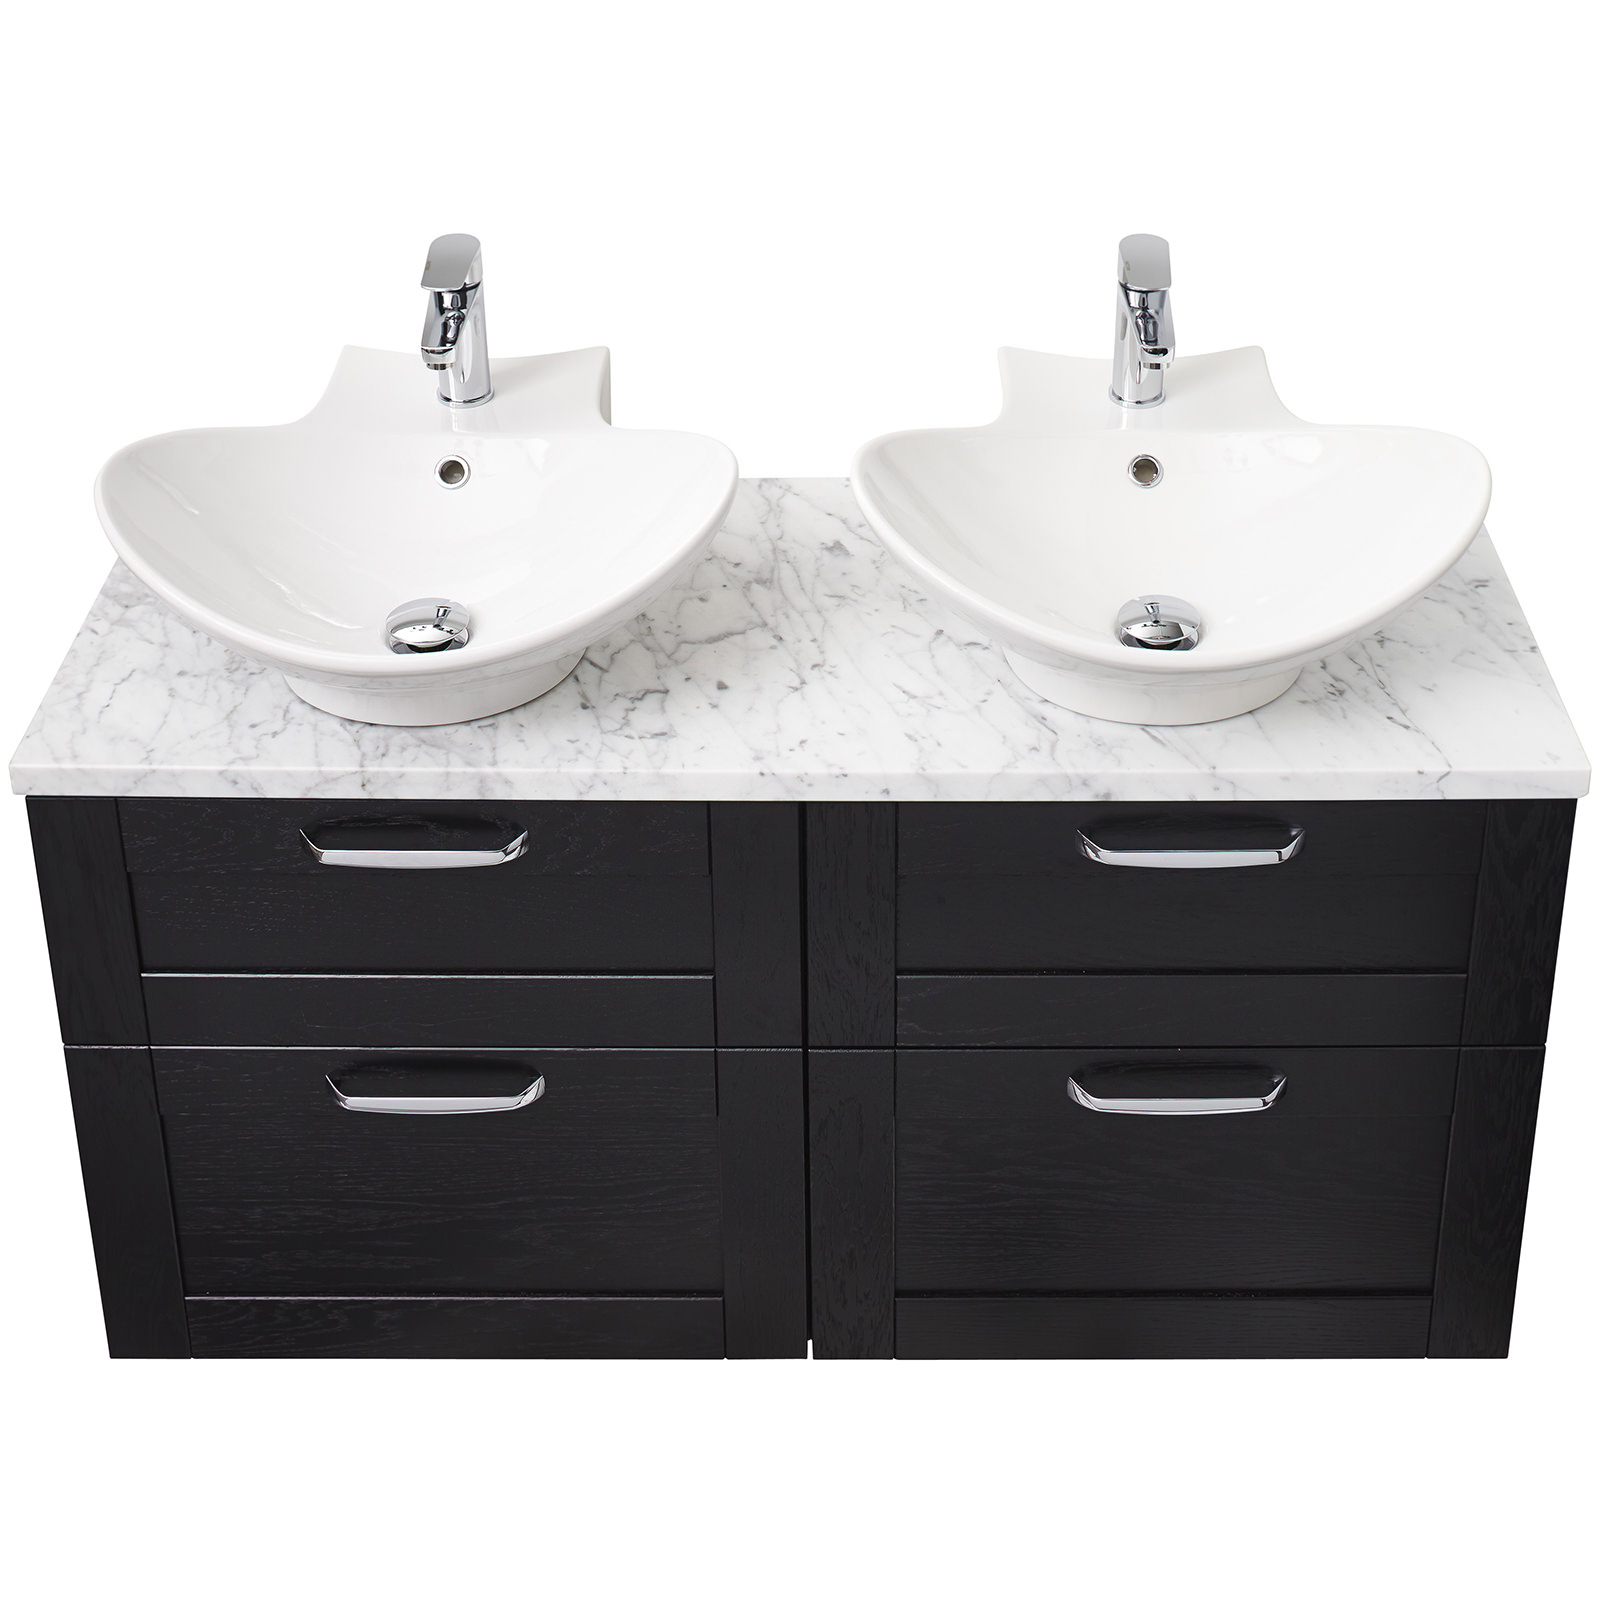 Four Drawer Wall Hung Vanity Unit, 55 Inch White Double Sink Vanity Unit